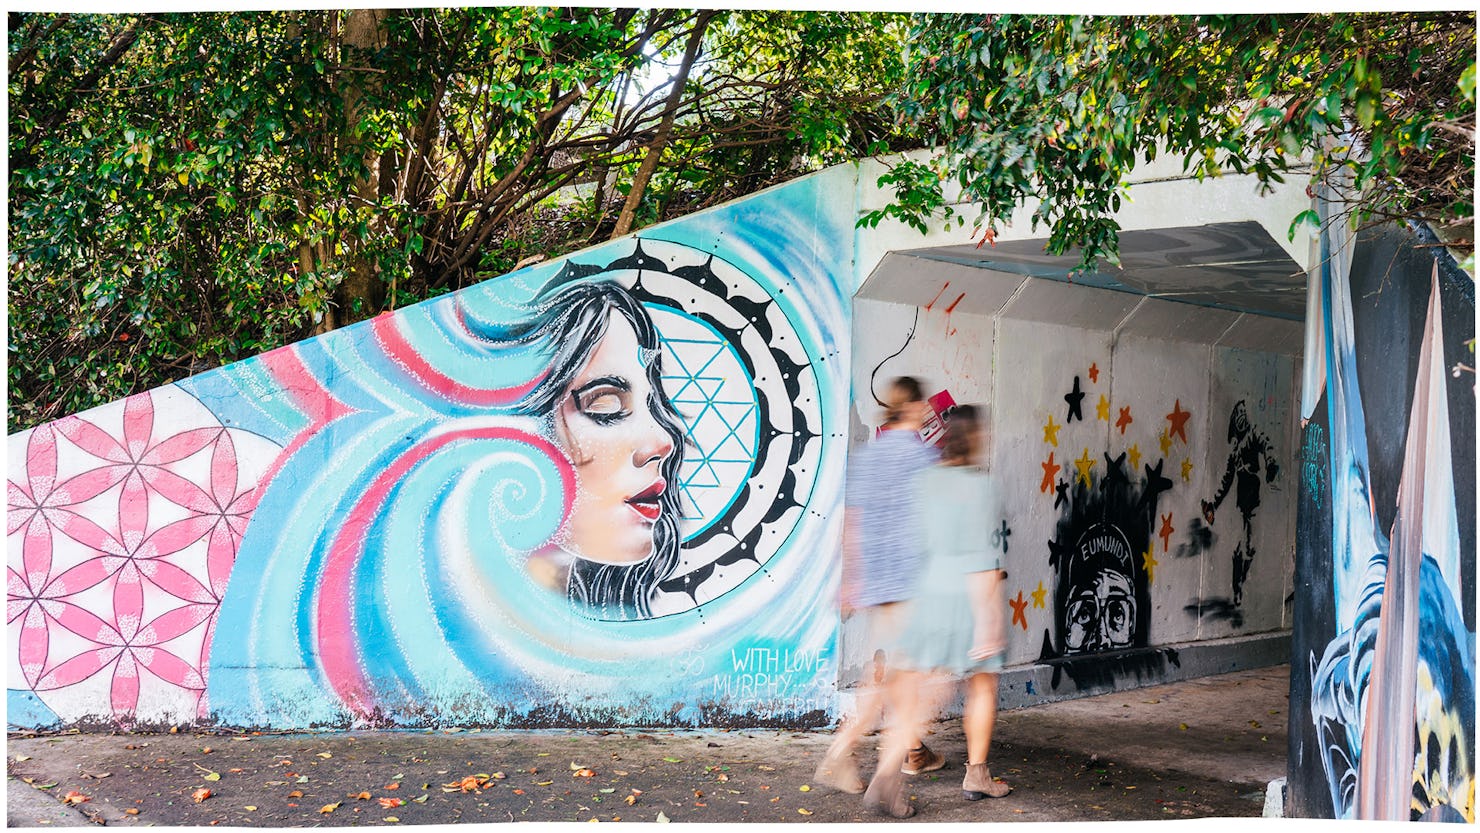 Discover the Sunshine Coast's best art and culture with this ultimate guide 